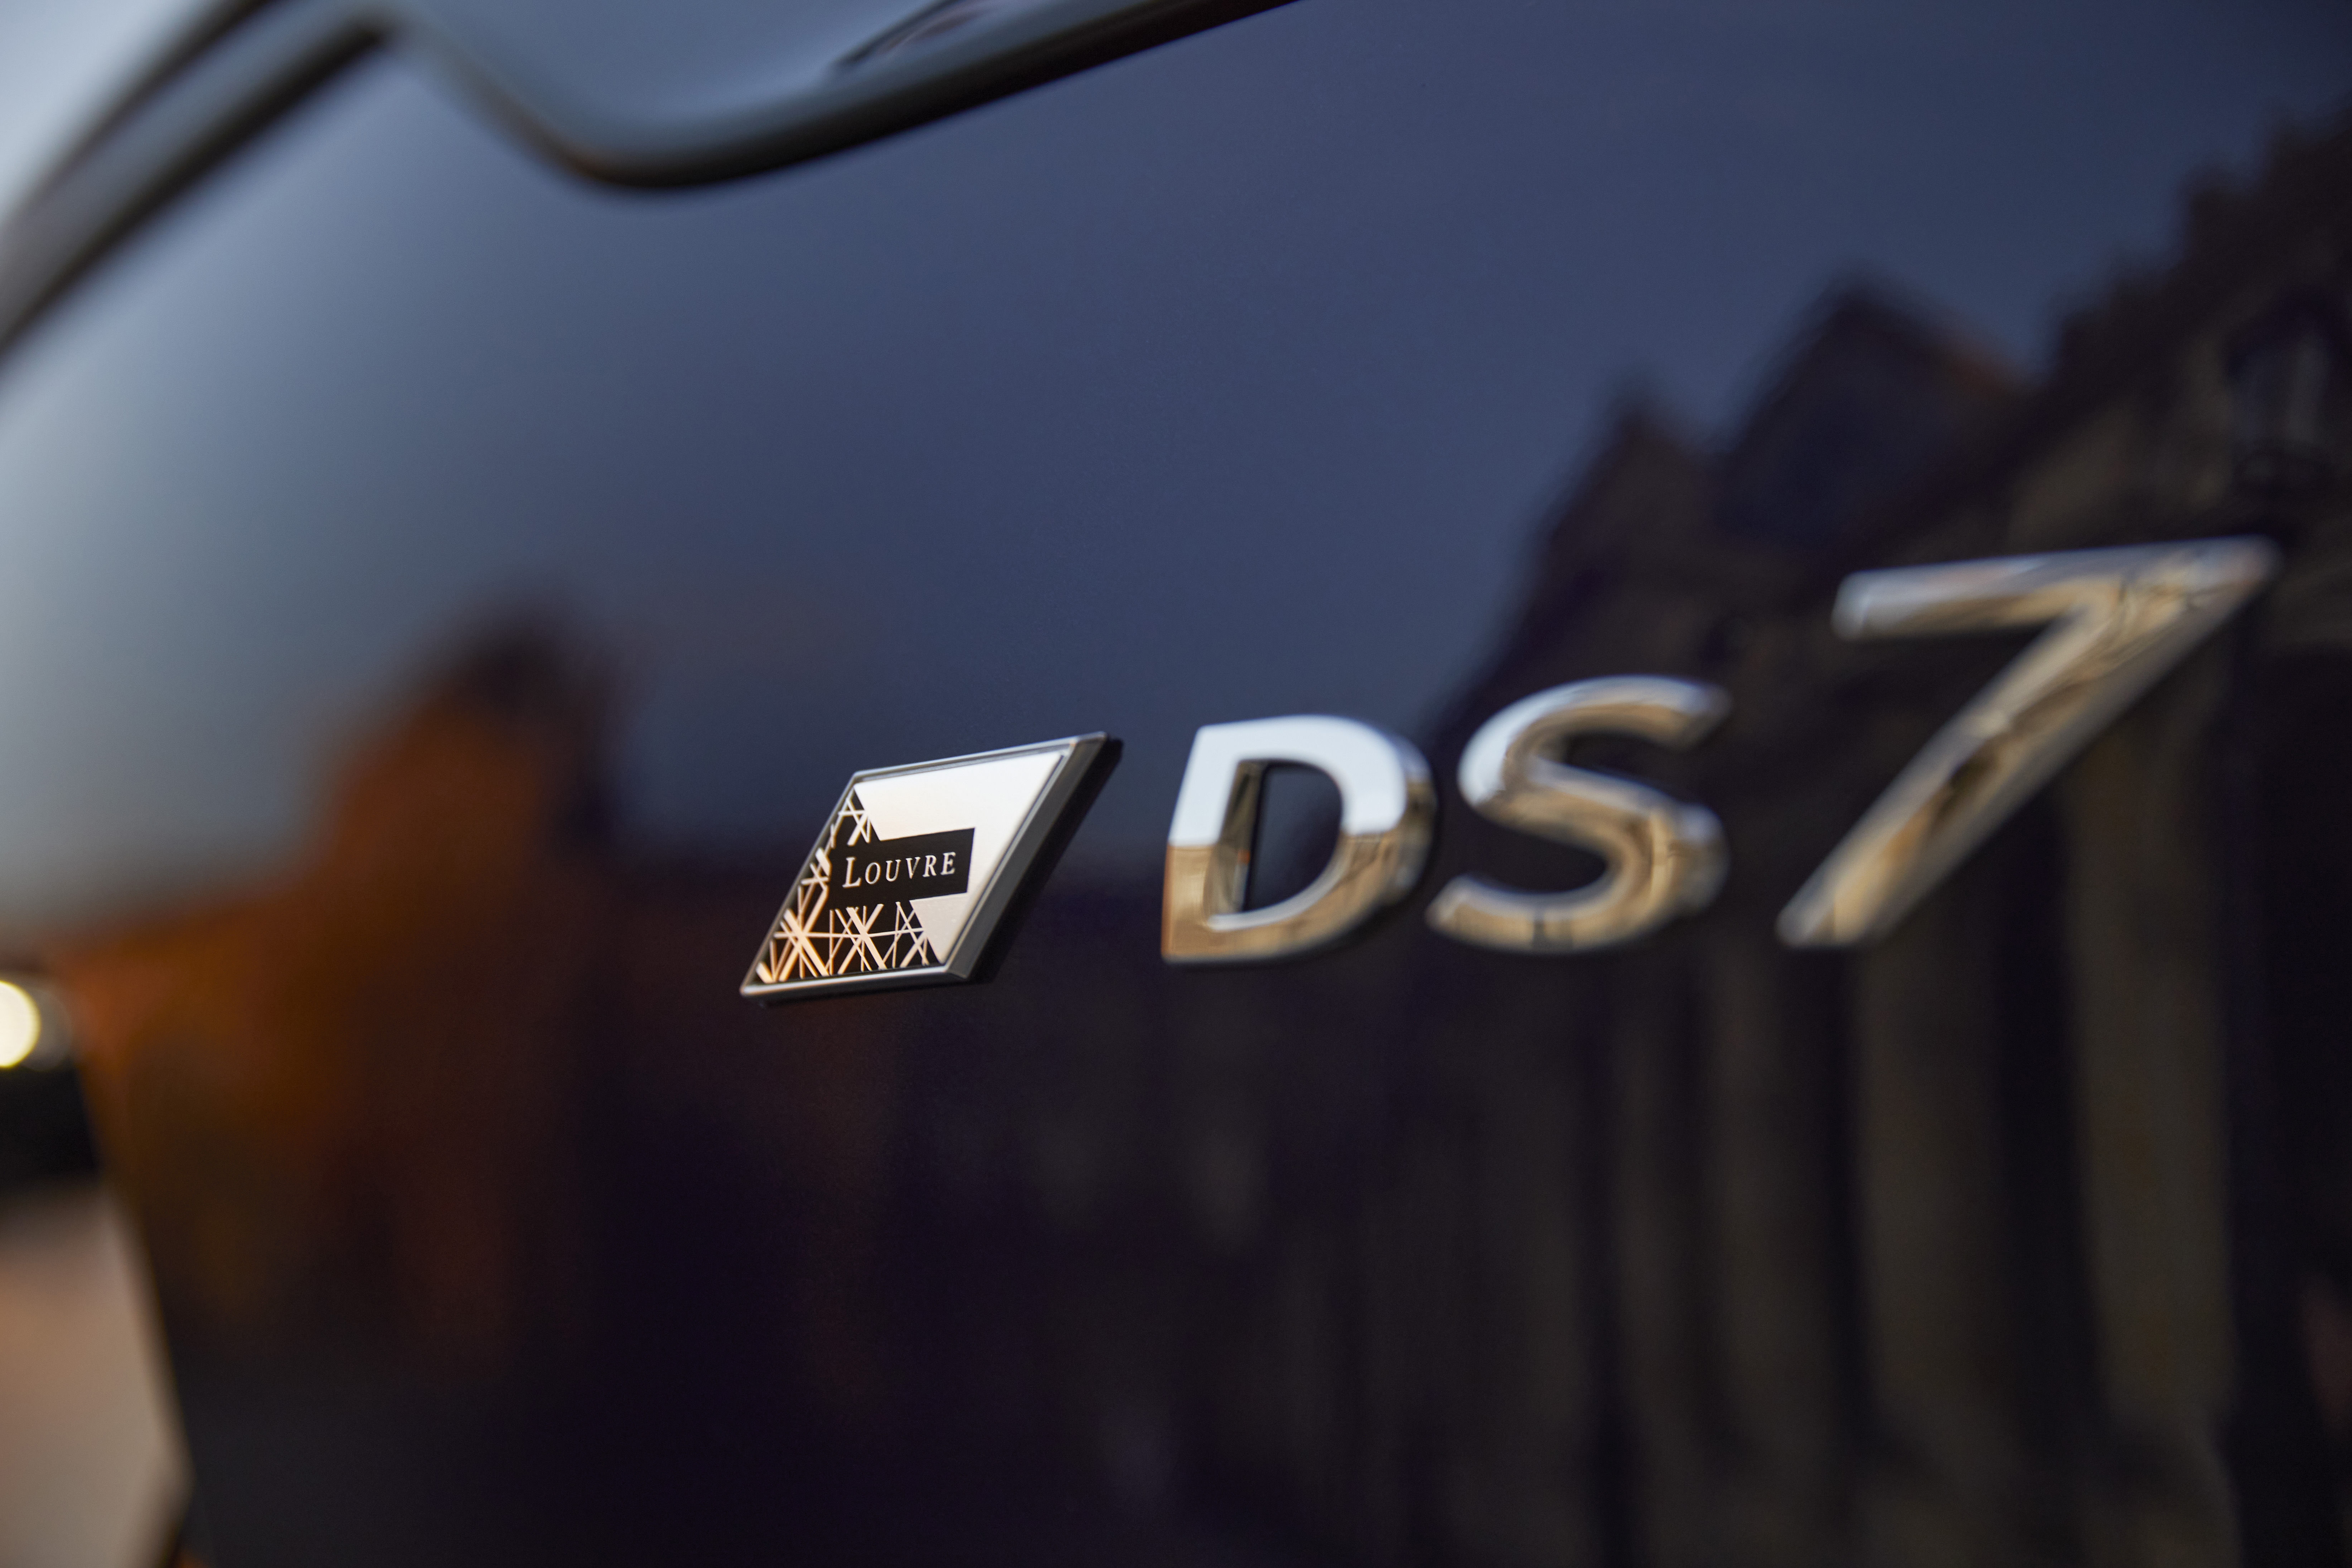 DS7CrossbackLouvre